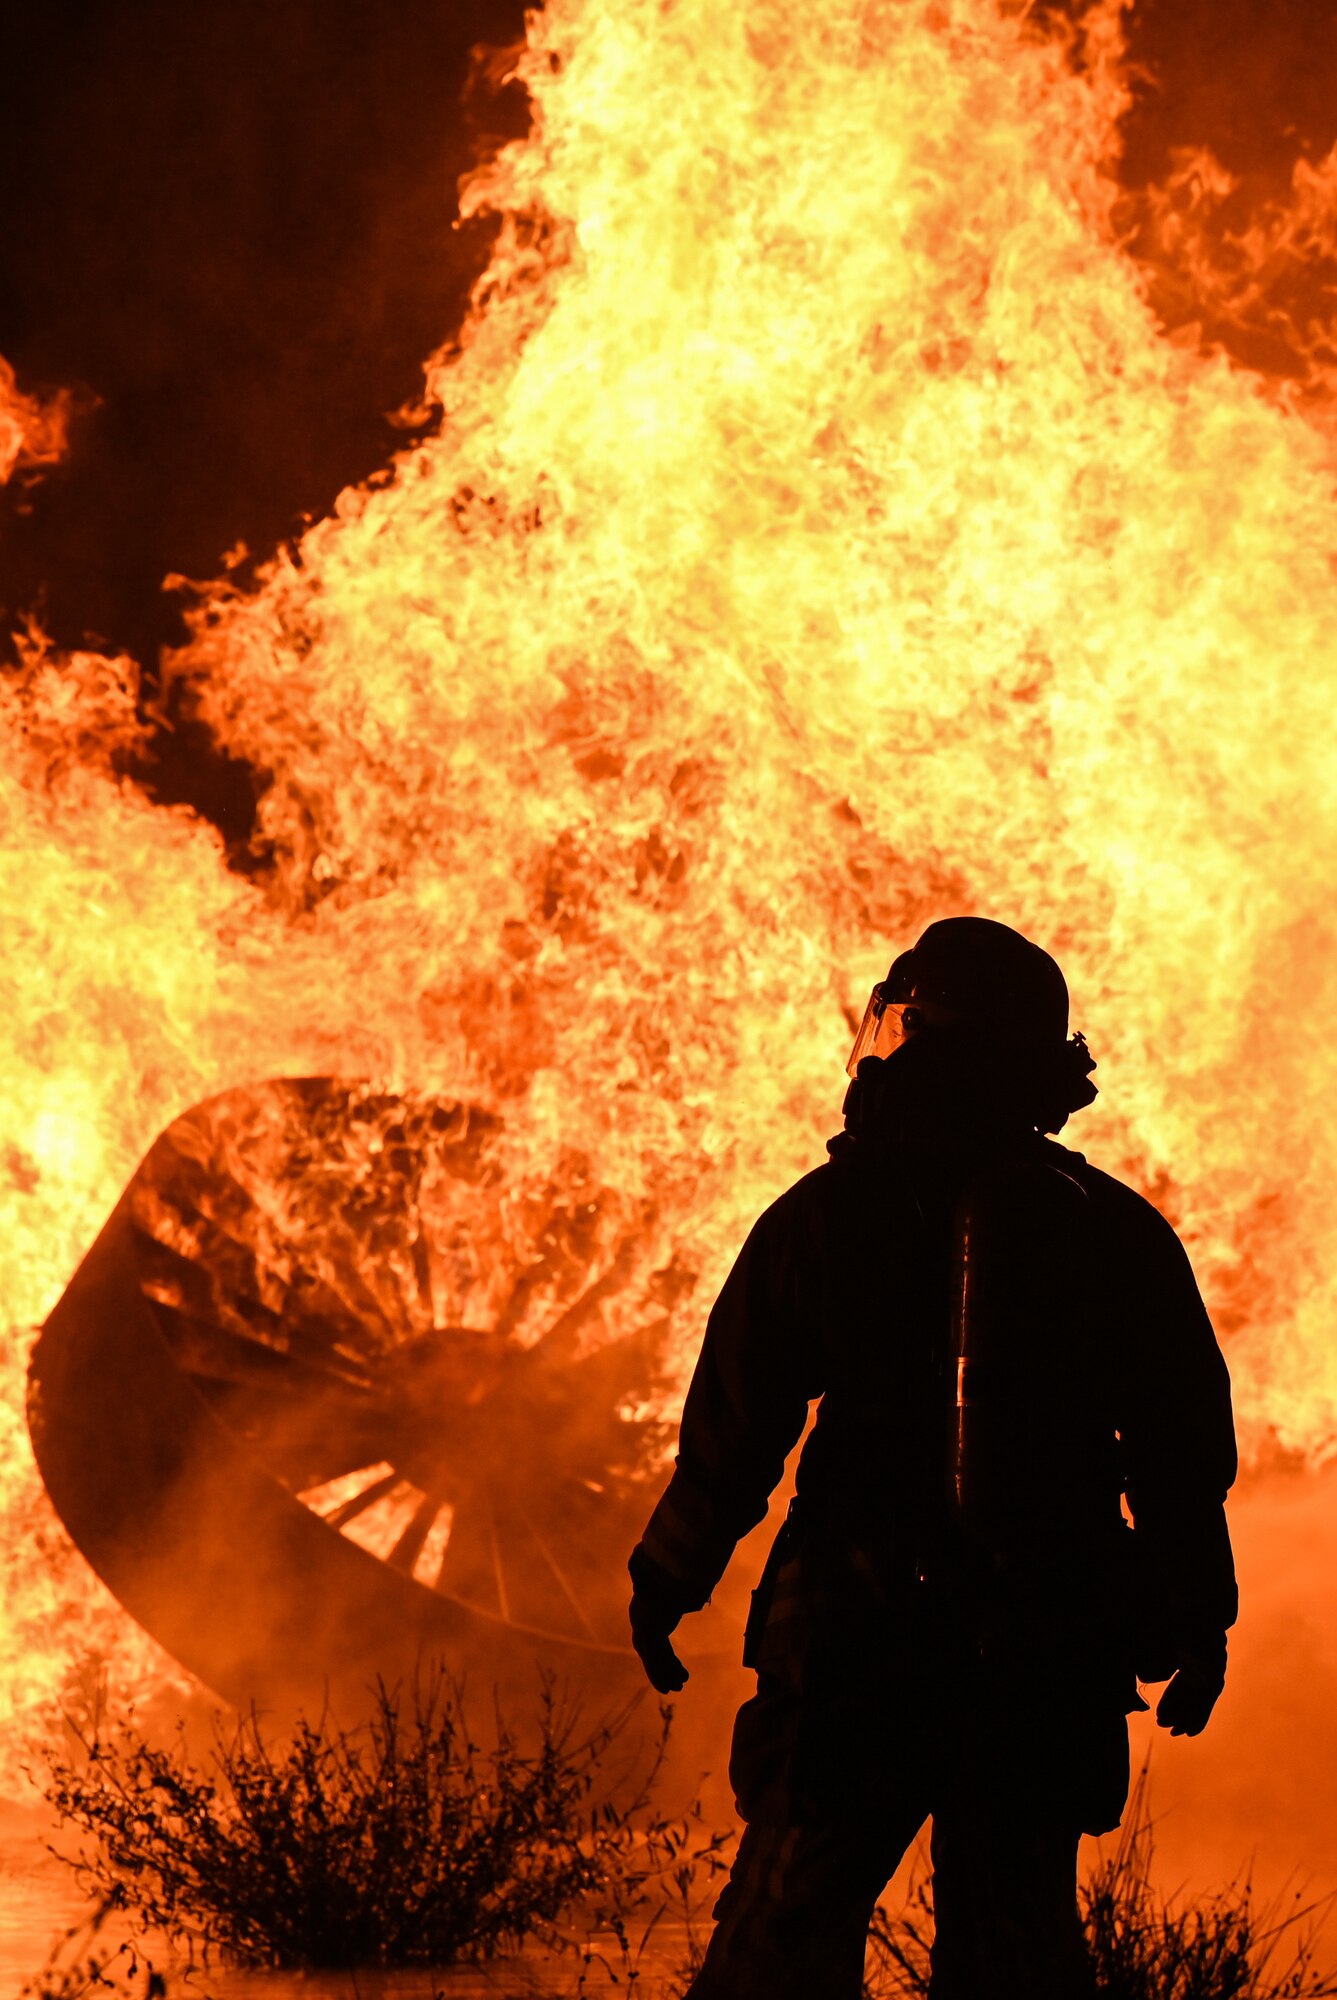 A firefighter from the 97th Civil Engineer Squadron observes as other firefighters put out a fire during a live-burn training at Altus Air Force Base (AAFB), Oklahoma, Oct. 12, 2022. Live burns during Fire Prevention Week are showcased to the public to display the capabilities of AAFB fire personnel. (U.S. Air Force photo by Senior Airman Kayla Christenson)